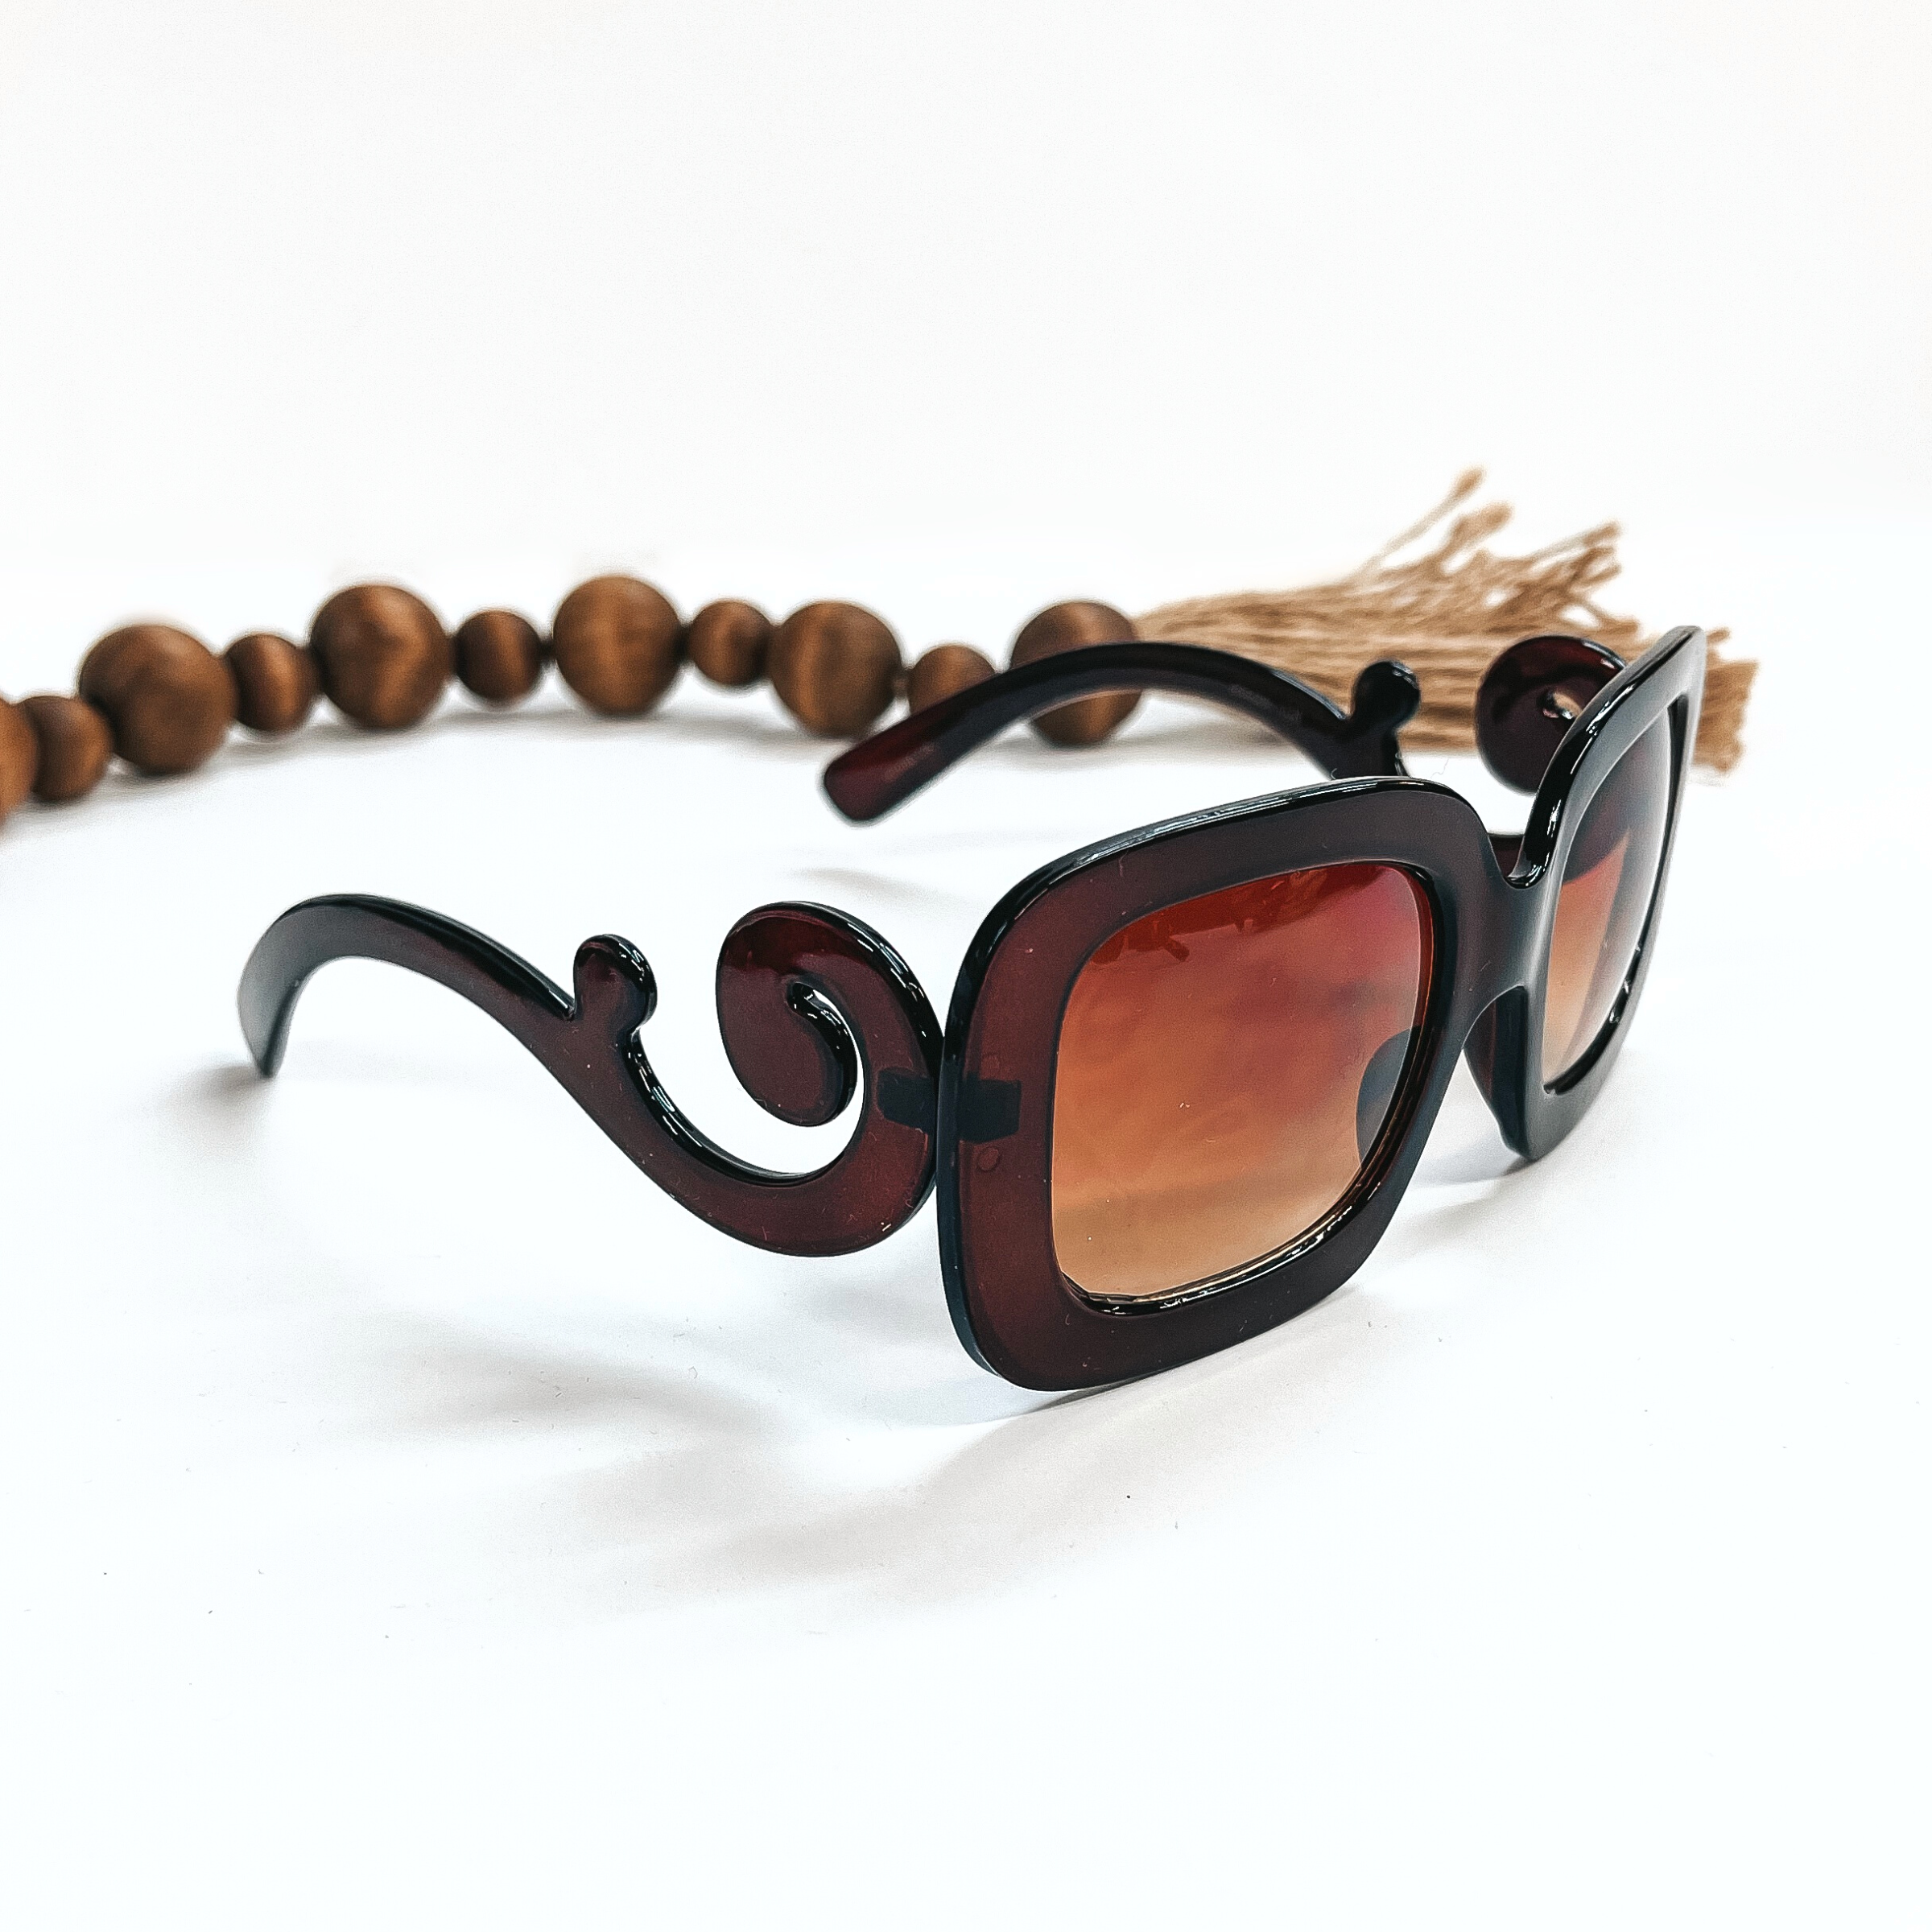 This a pair of brown frame sunglasses, square rounded shape with a brown  lense. The sides of the sunglasses have a large swirls. These sunglasses are taken  on a white background with dark brown beads and brown tassel in the back as decor.